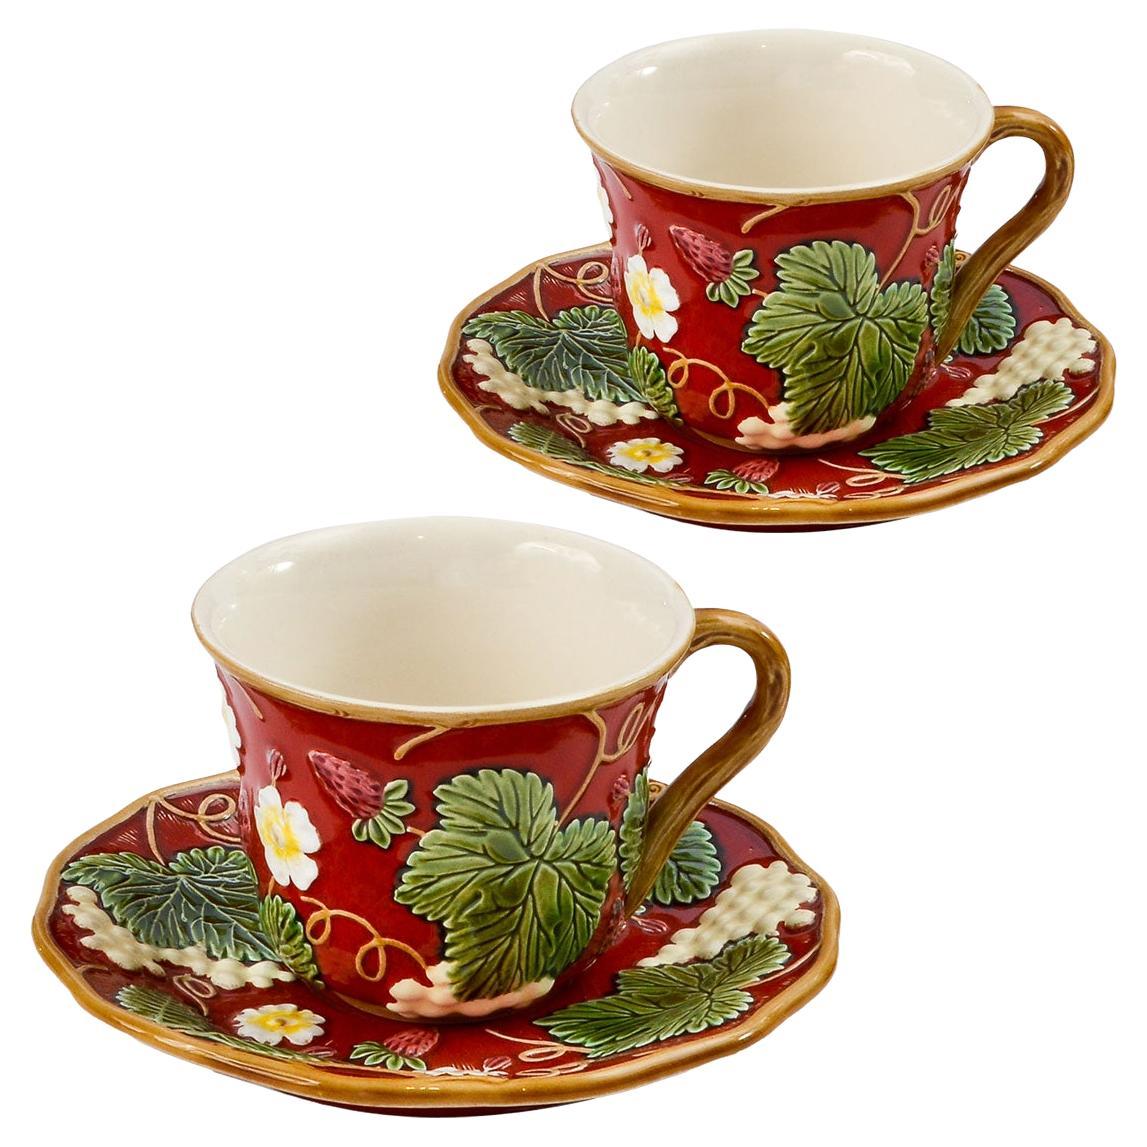 Flowery Tea Cups for 2 "George Sand" For Sale